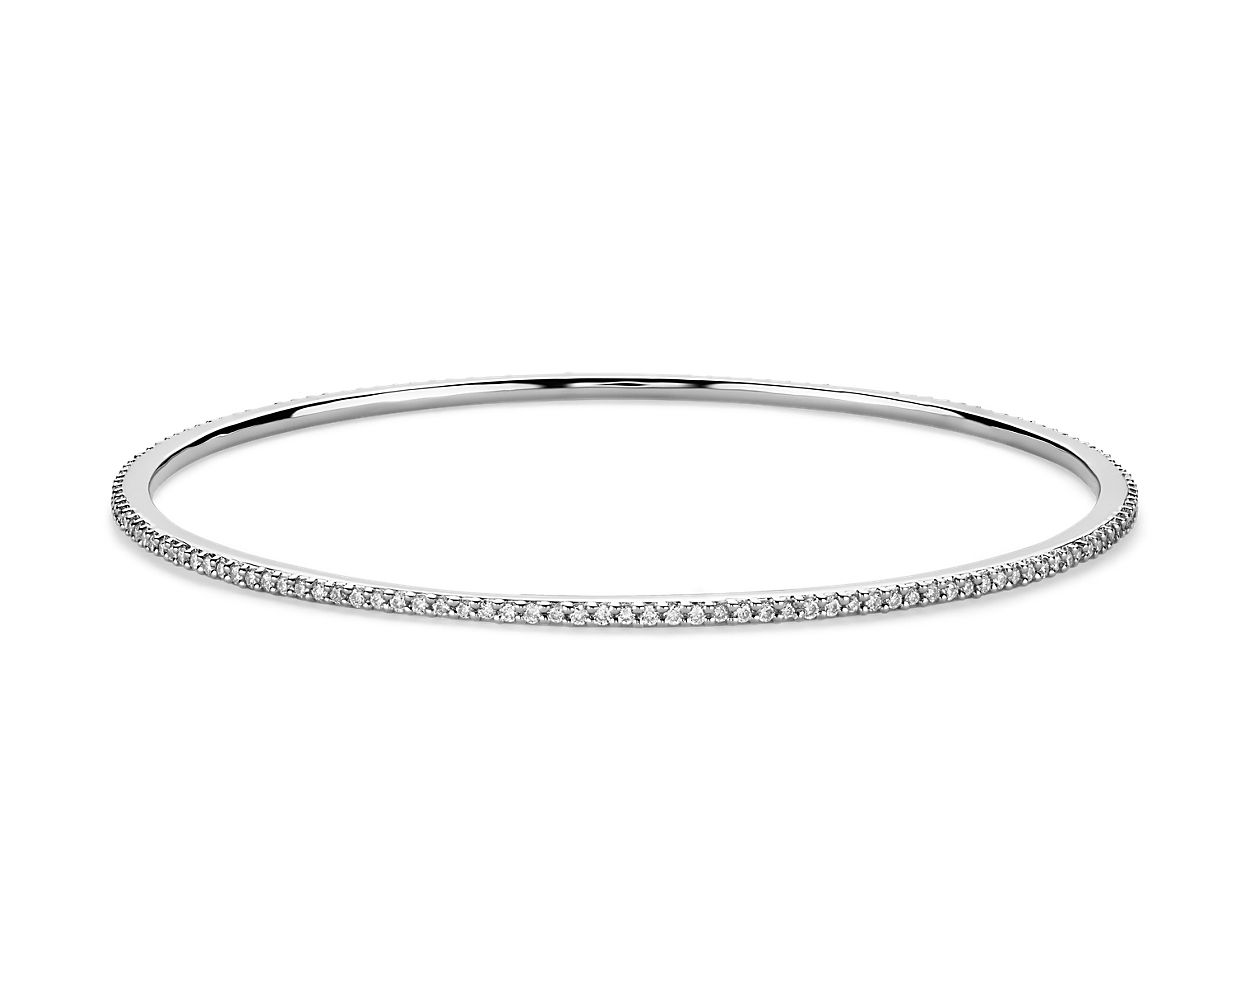 Stackable Pavé Diamond Bangle in 18k White Gold (1 ct. tw.)